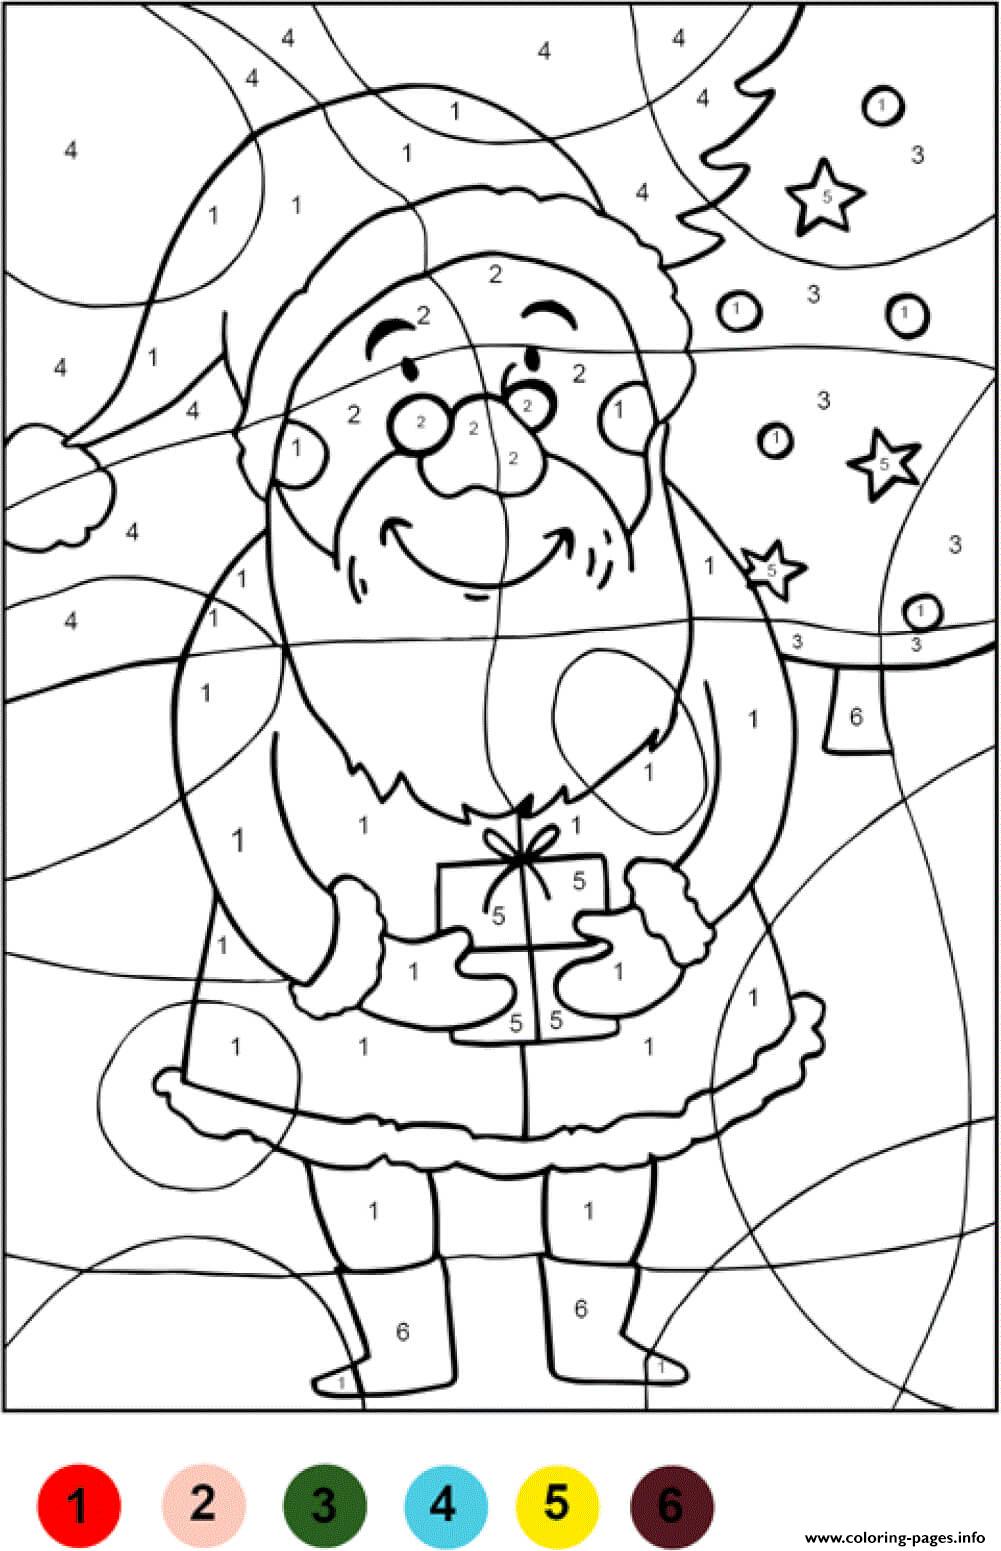 magic-of-christmas-number-color-by-number-coloring-page-printable